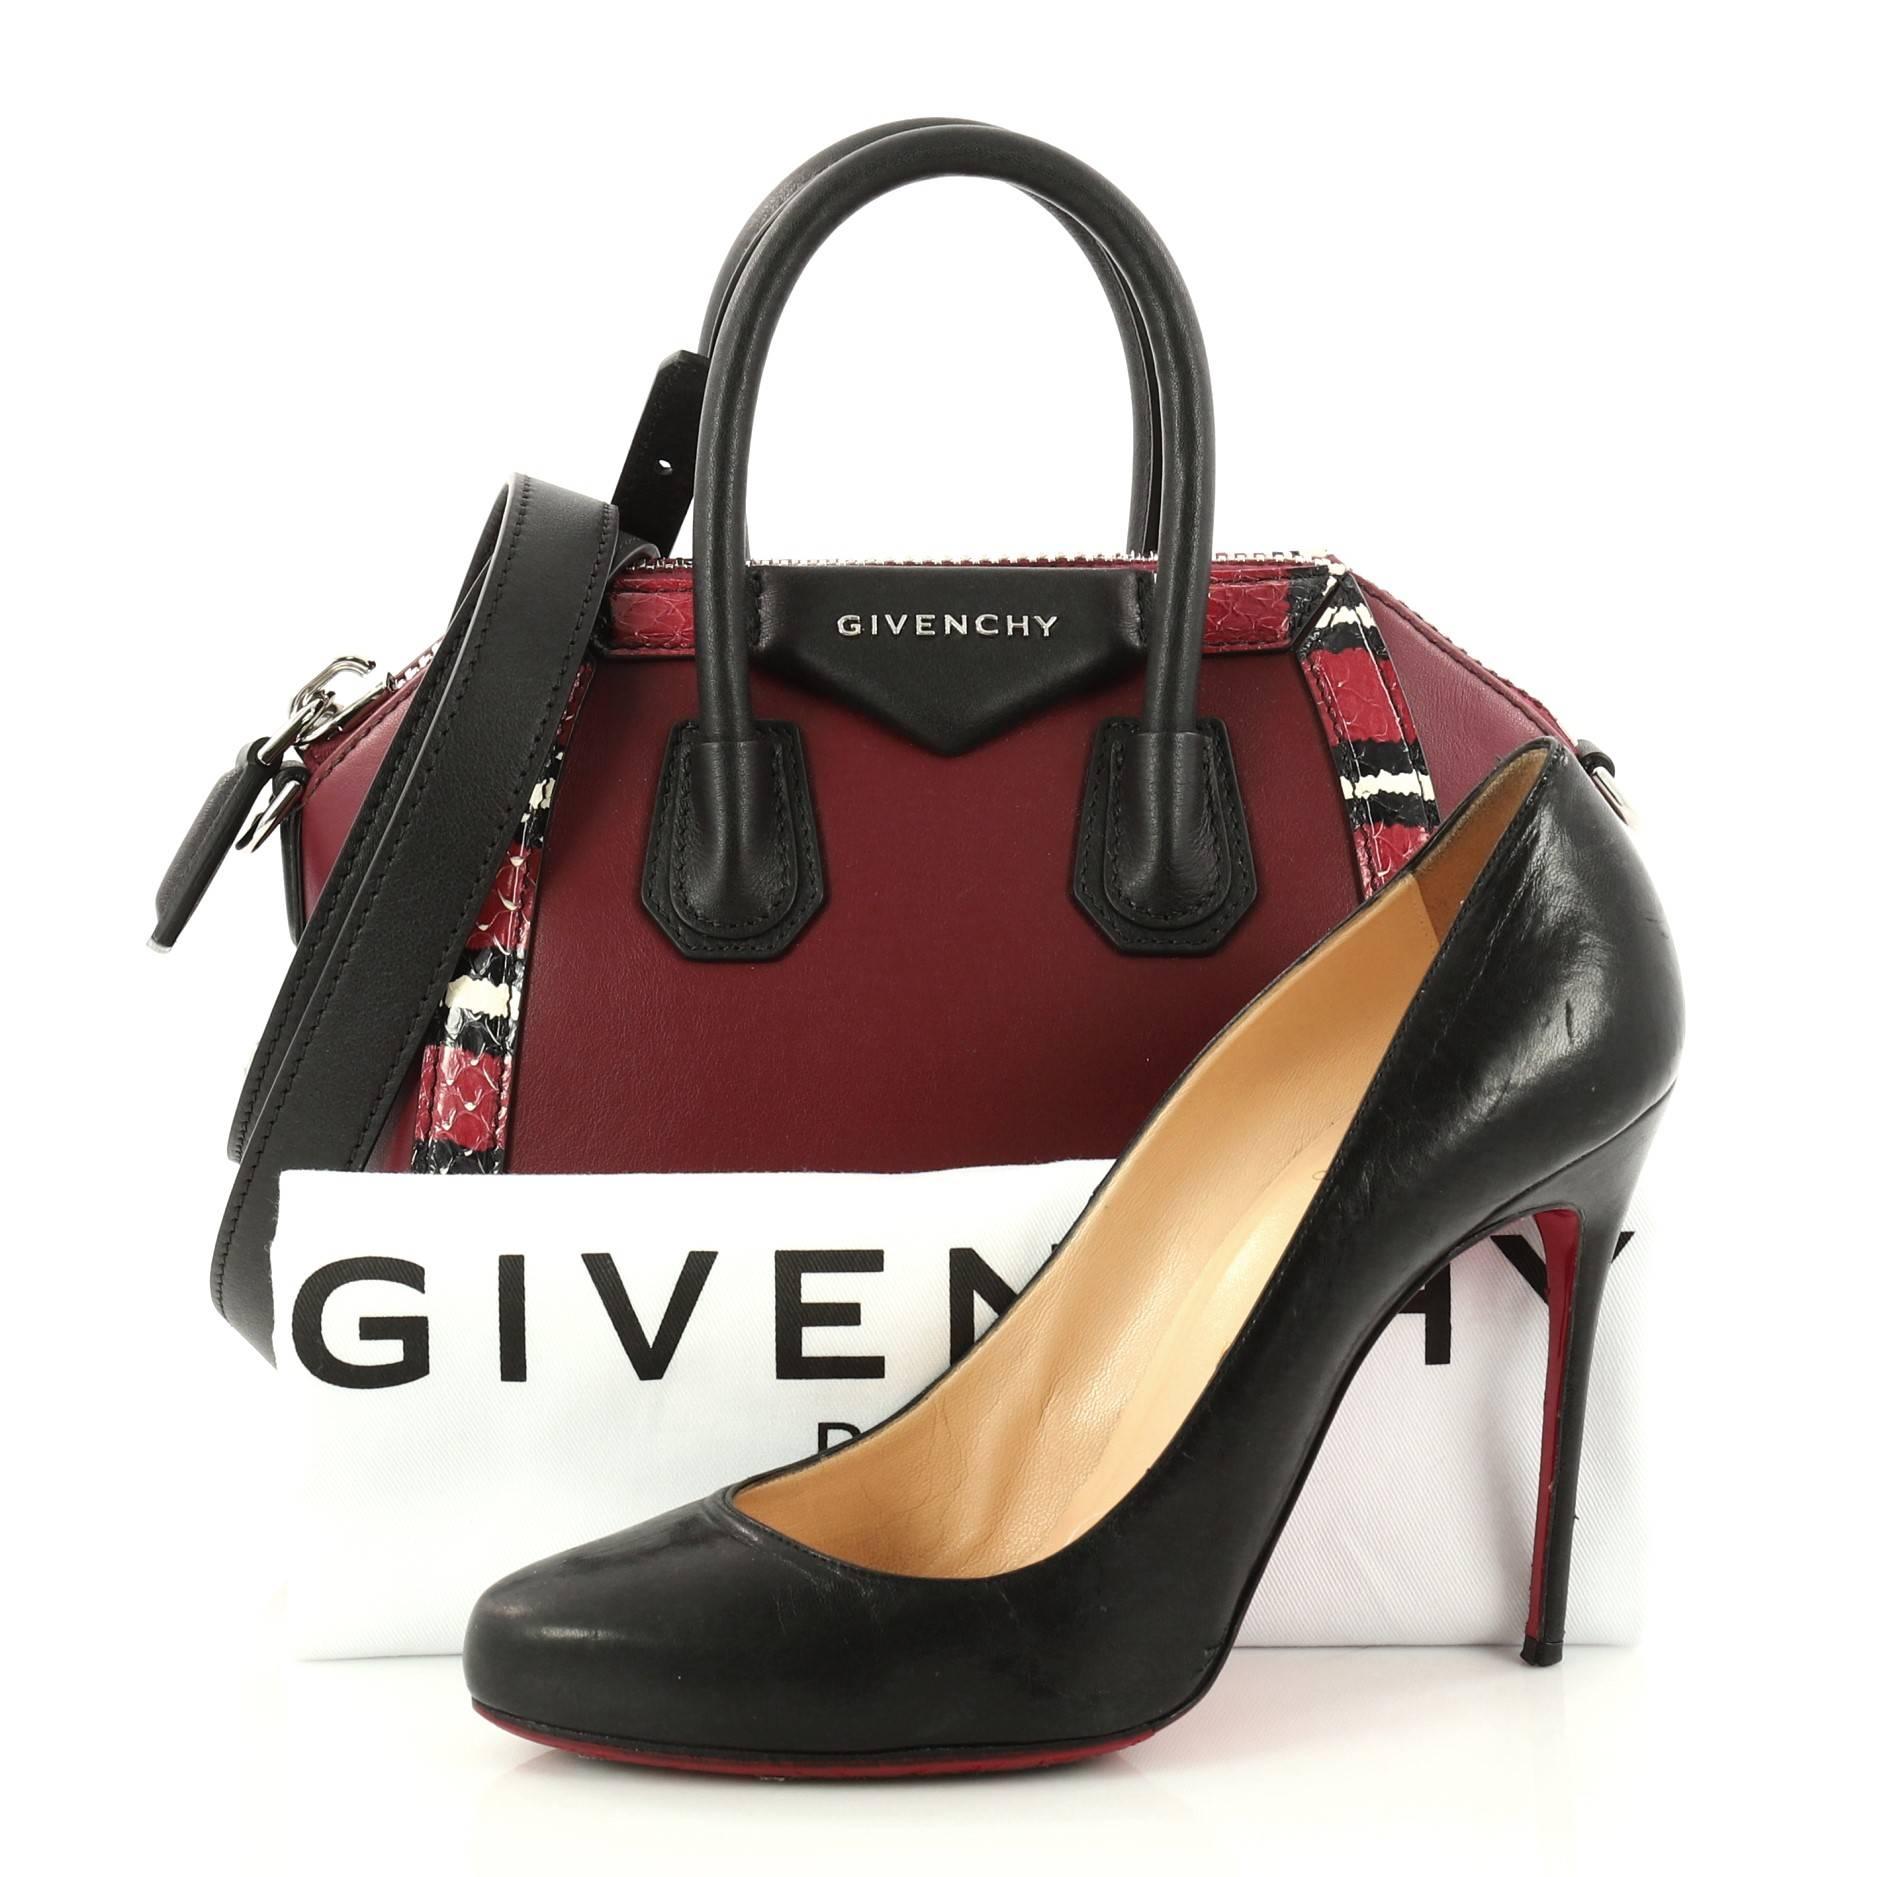 This authentic Givenchy Antigona Bag Leather with Snakeskin Mini from 2017 presents the brand's most iconic bag in a miniature version. Crafted from burgundy leather and genuine multicolor python trim, this structured handle bag features dual-rolled